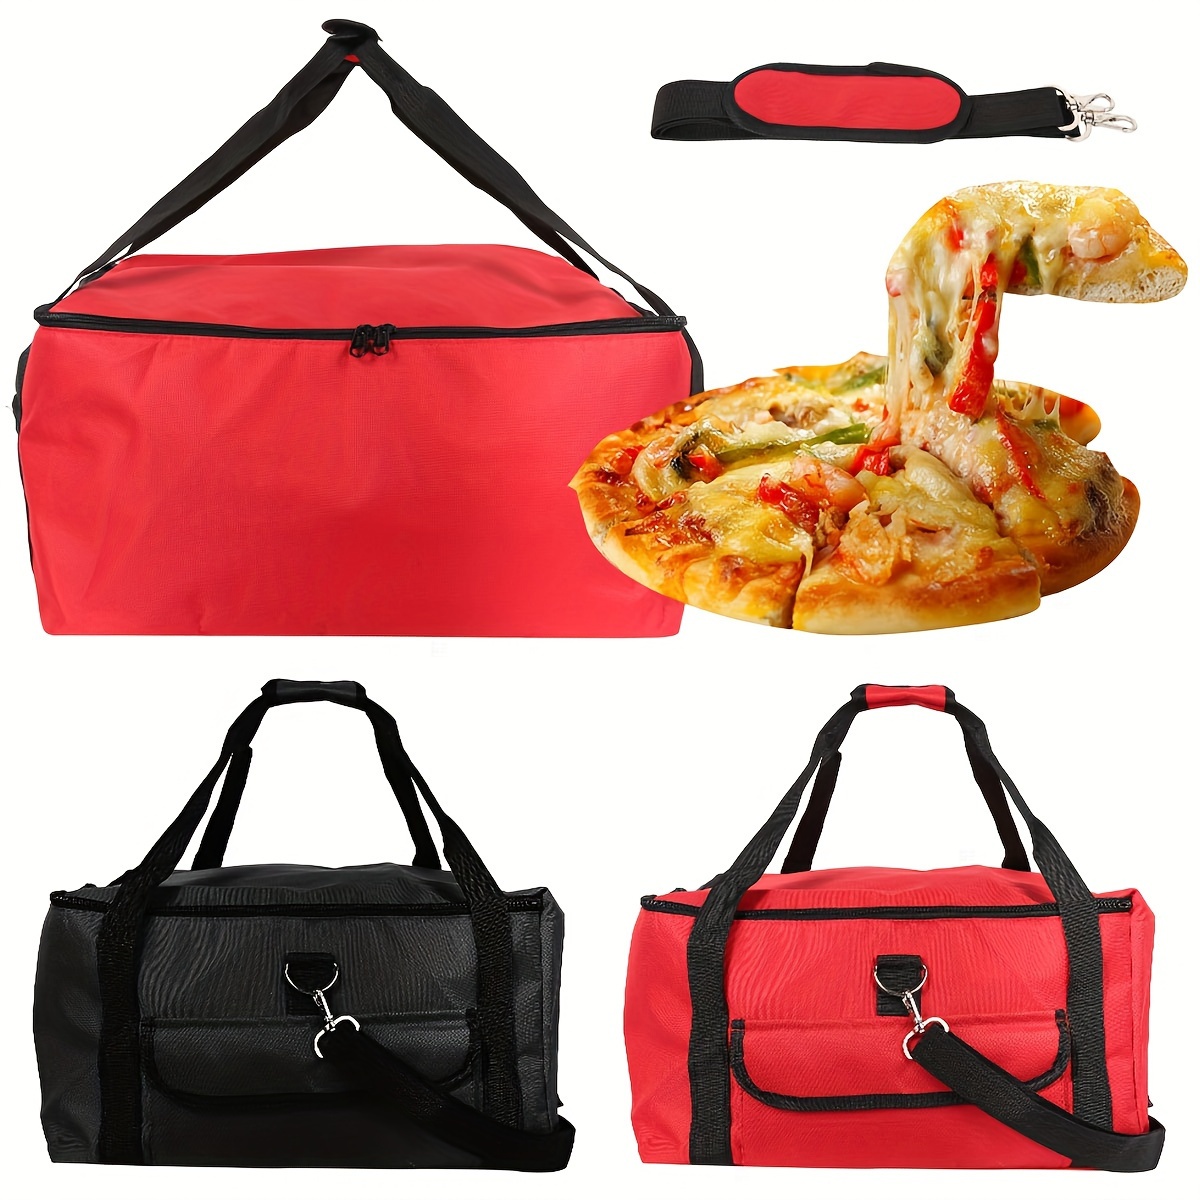  Sleek Space Large Insulated Bag for Hot or Cold Food.  Collapsible Cooler Bag, Thermal Bags Food Delivery Bag, Picnic Lunch Bag,  Frozen Food Shopping Bag, Large Pizza Bag, Instacart Grocery Tote 